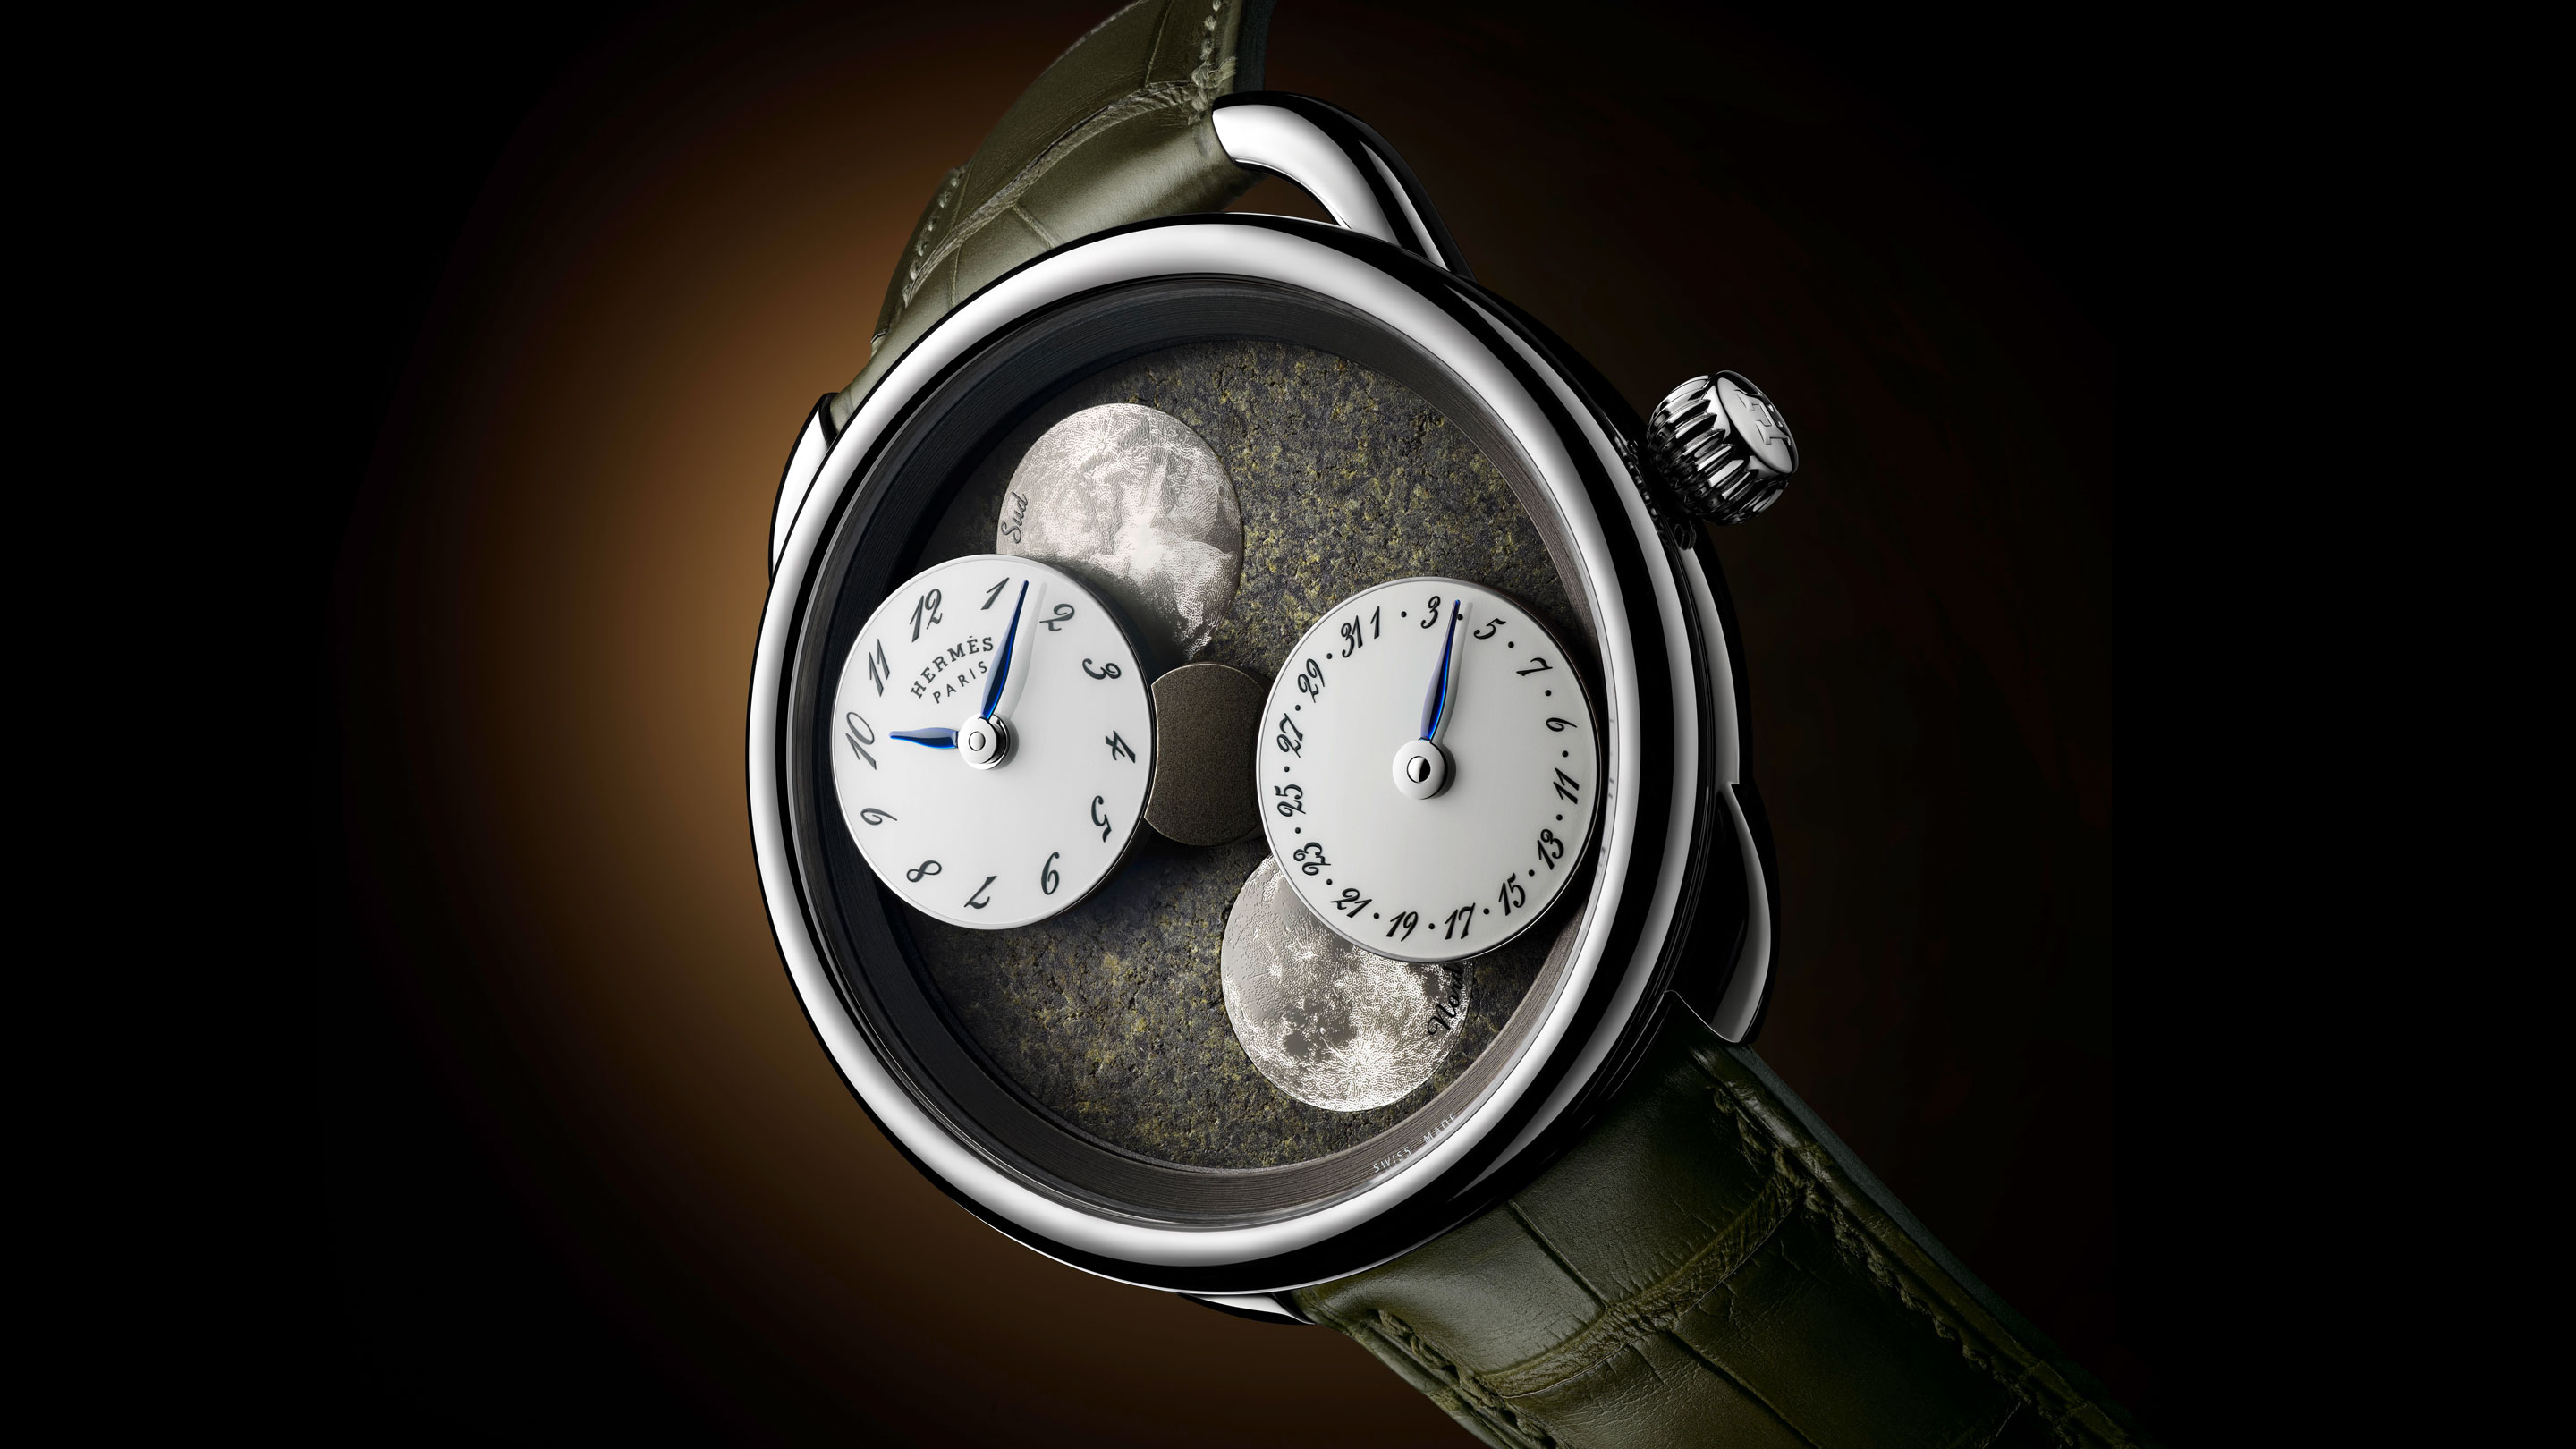 We uncomplicate and explain the features of a moonphase watch